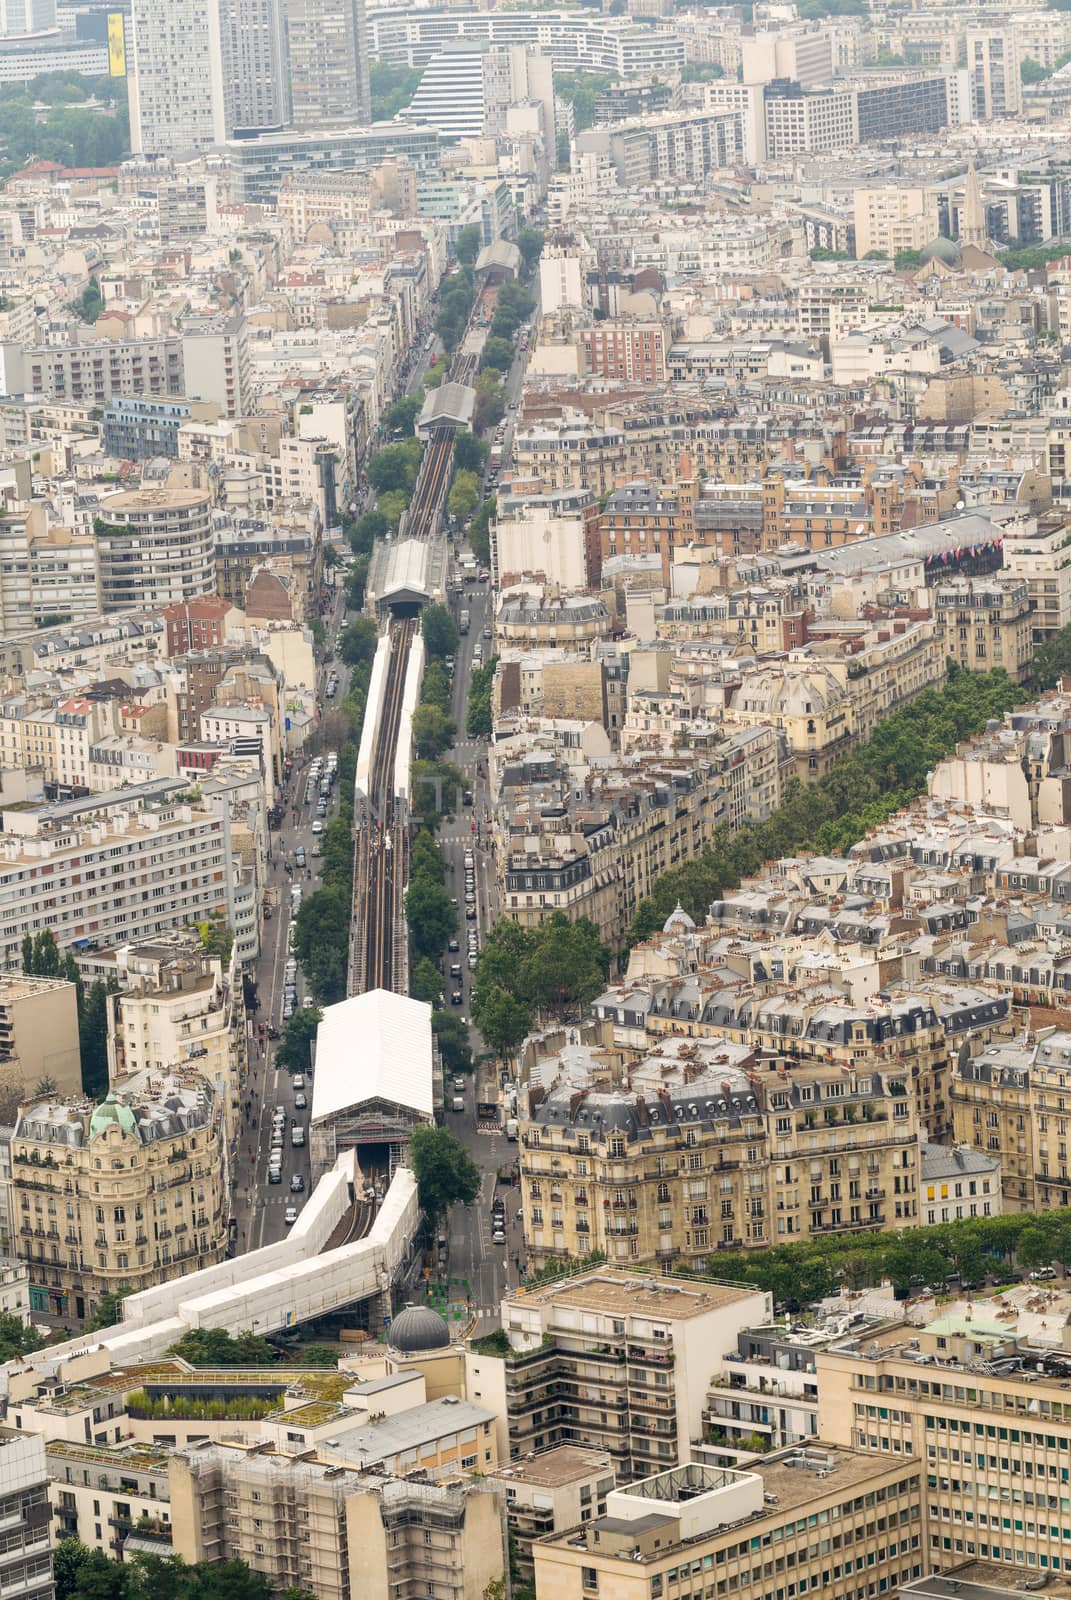 Paris, France. Aerial city view with buildings and railway.